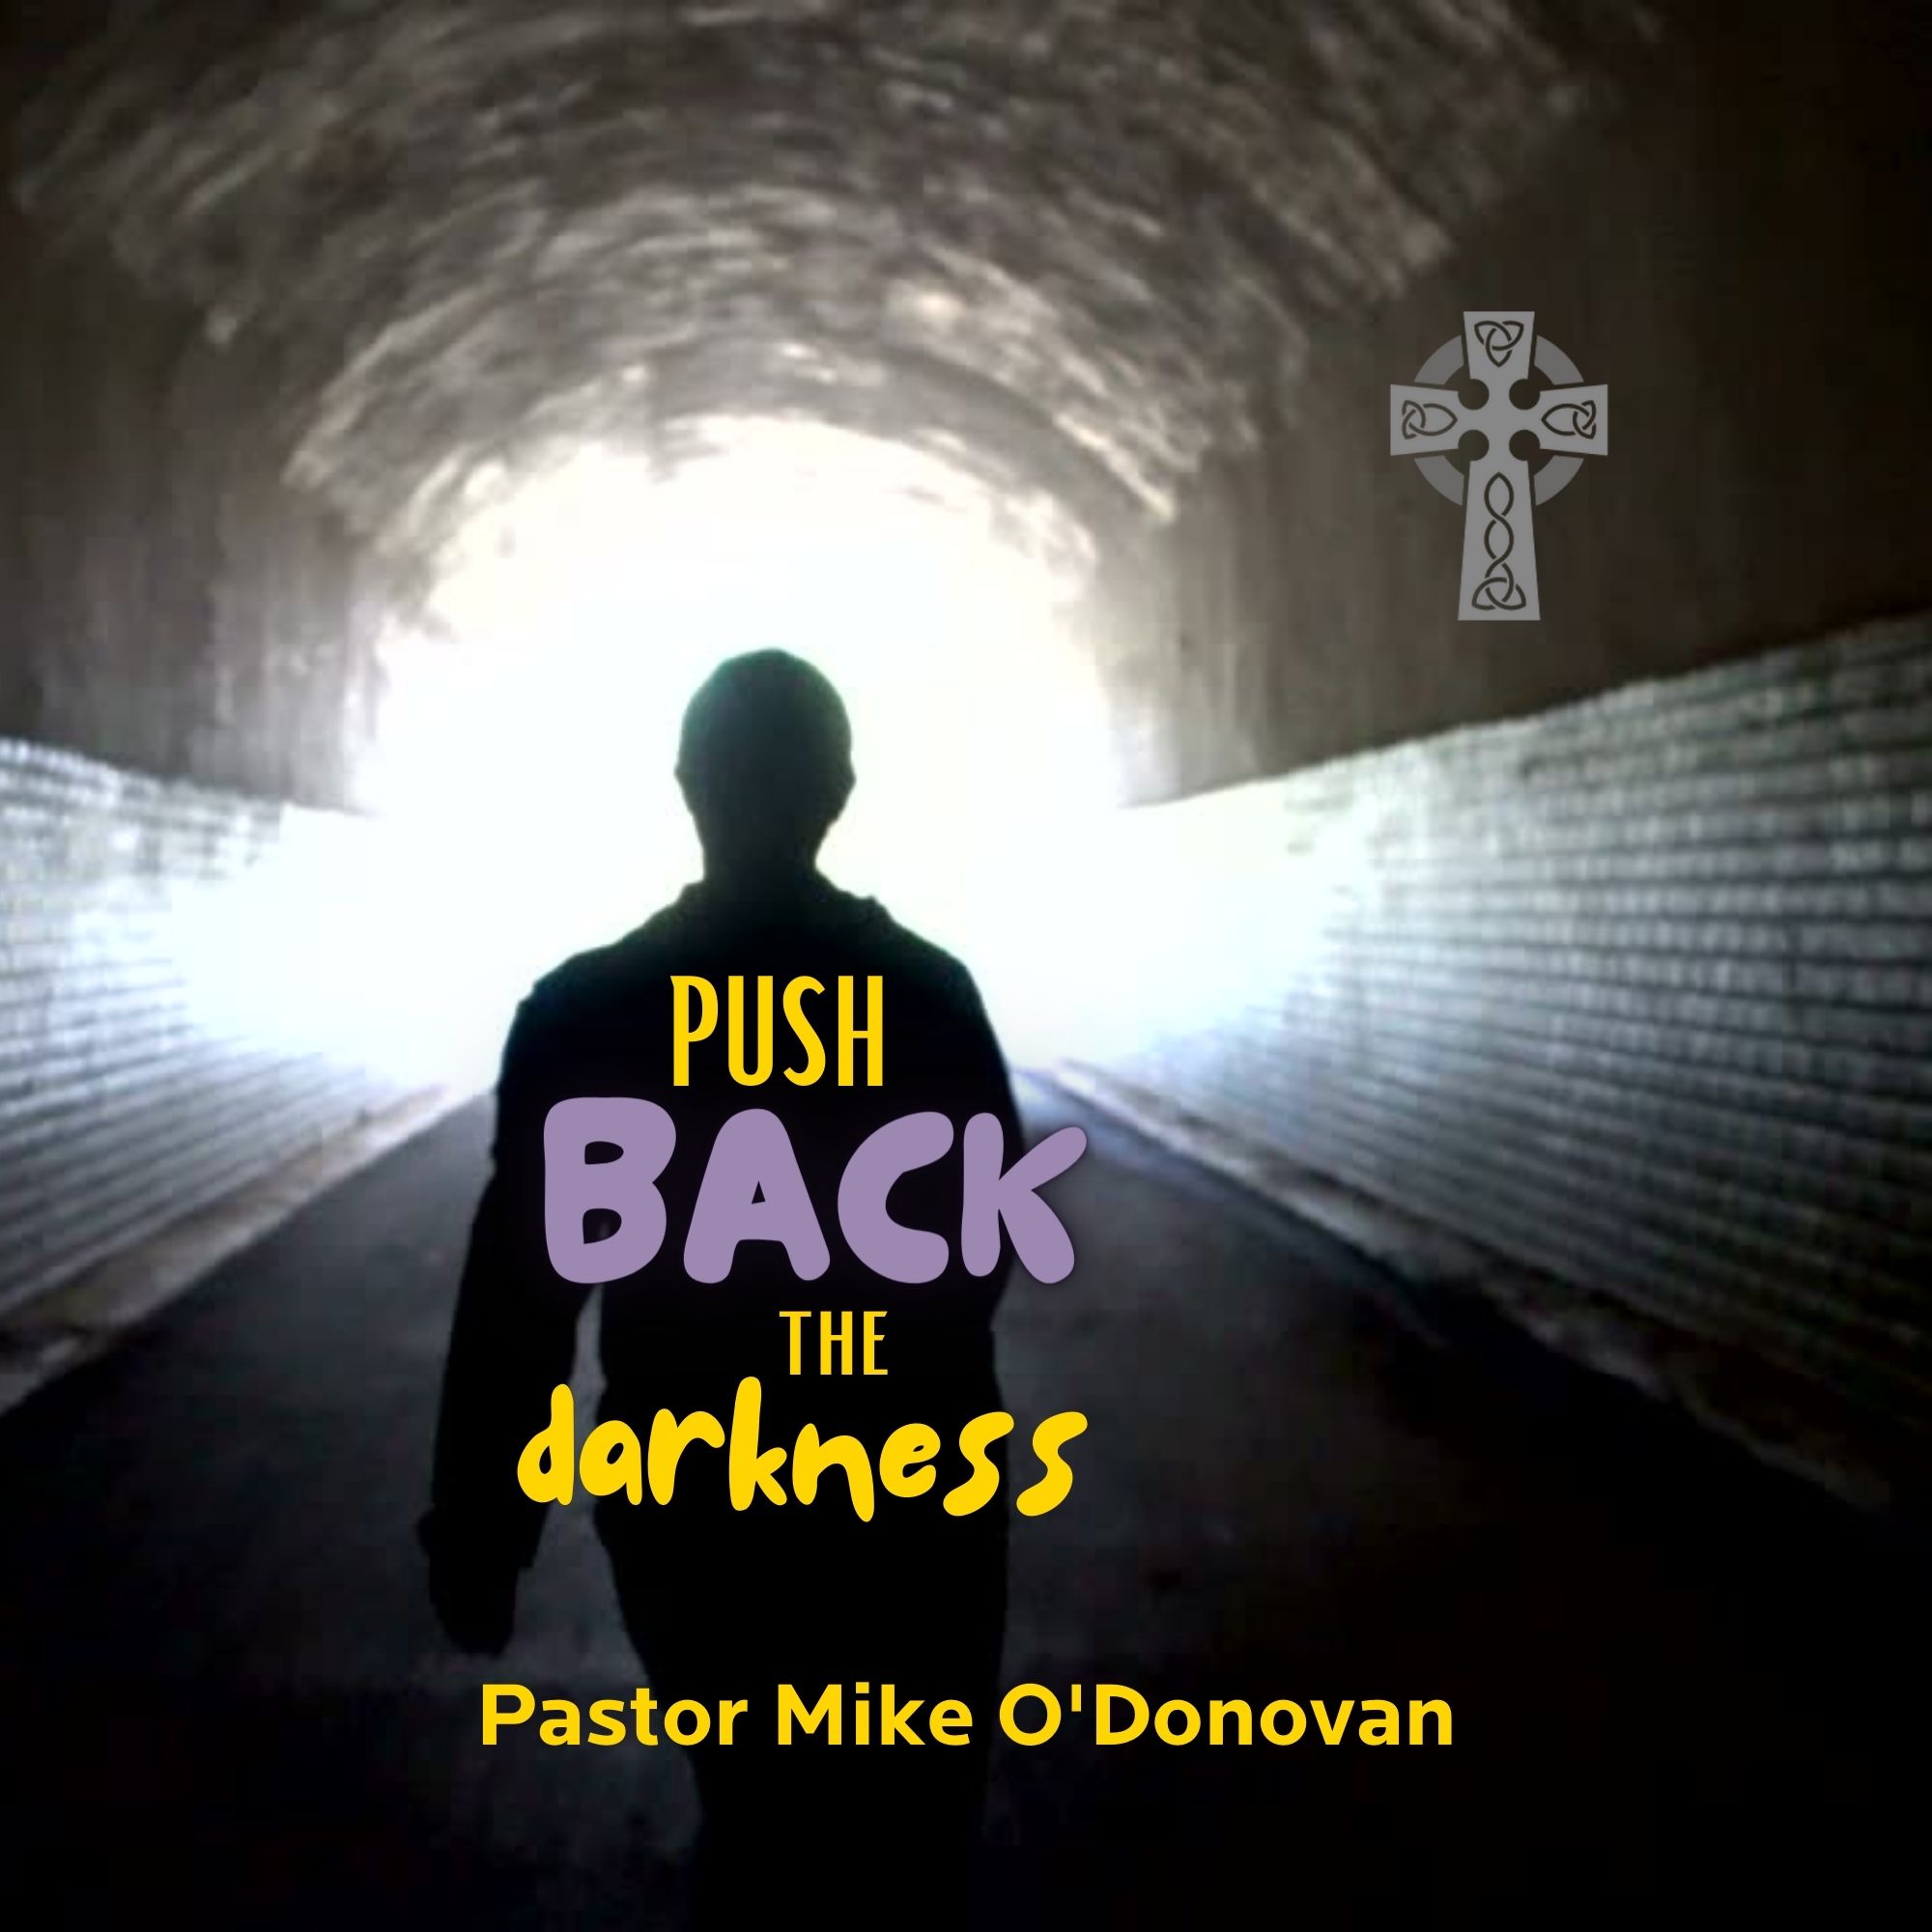 Push Back the Darkness - Pastor Mike O'Donovan